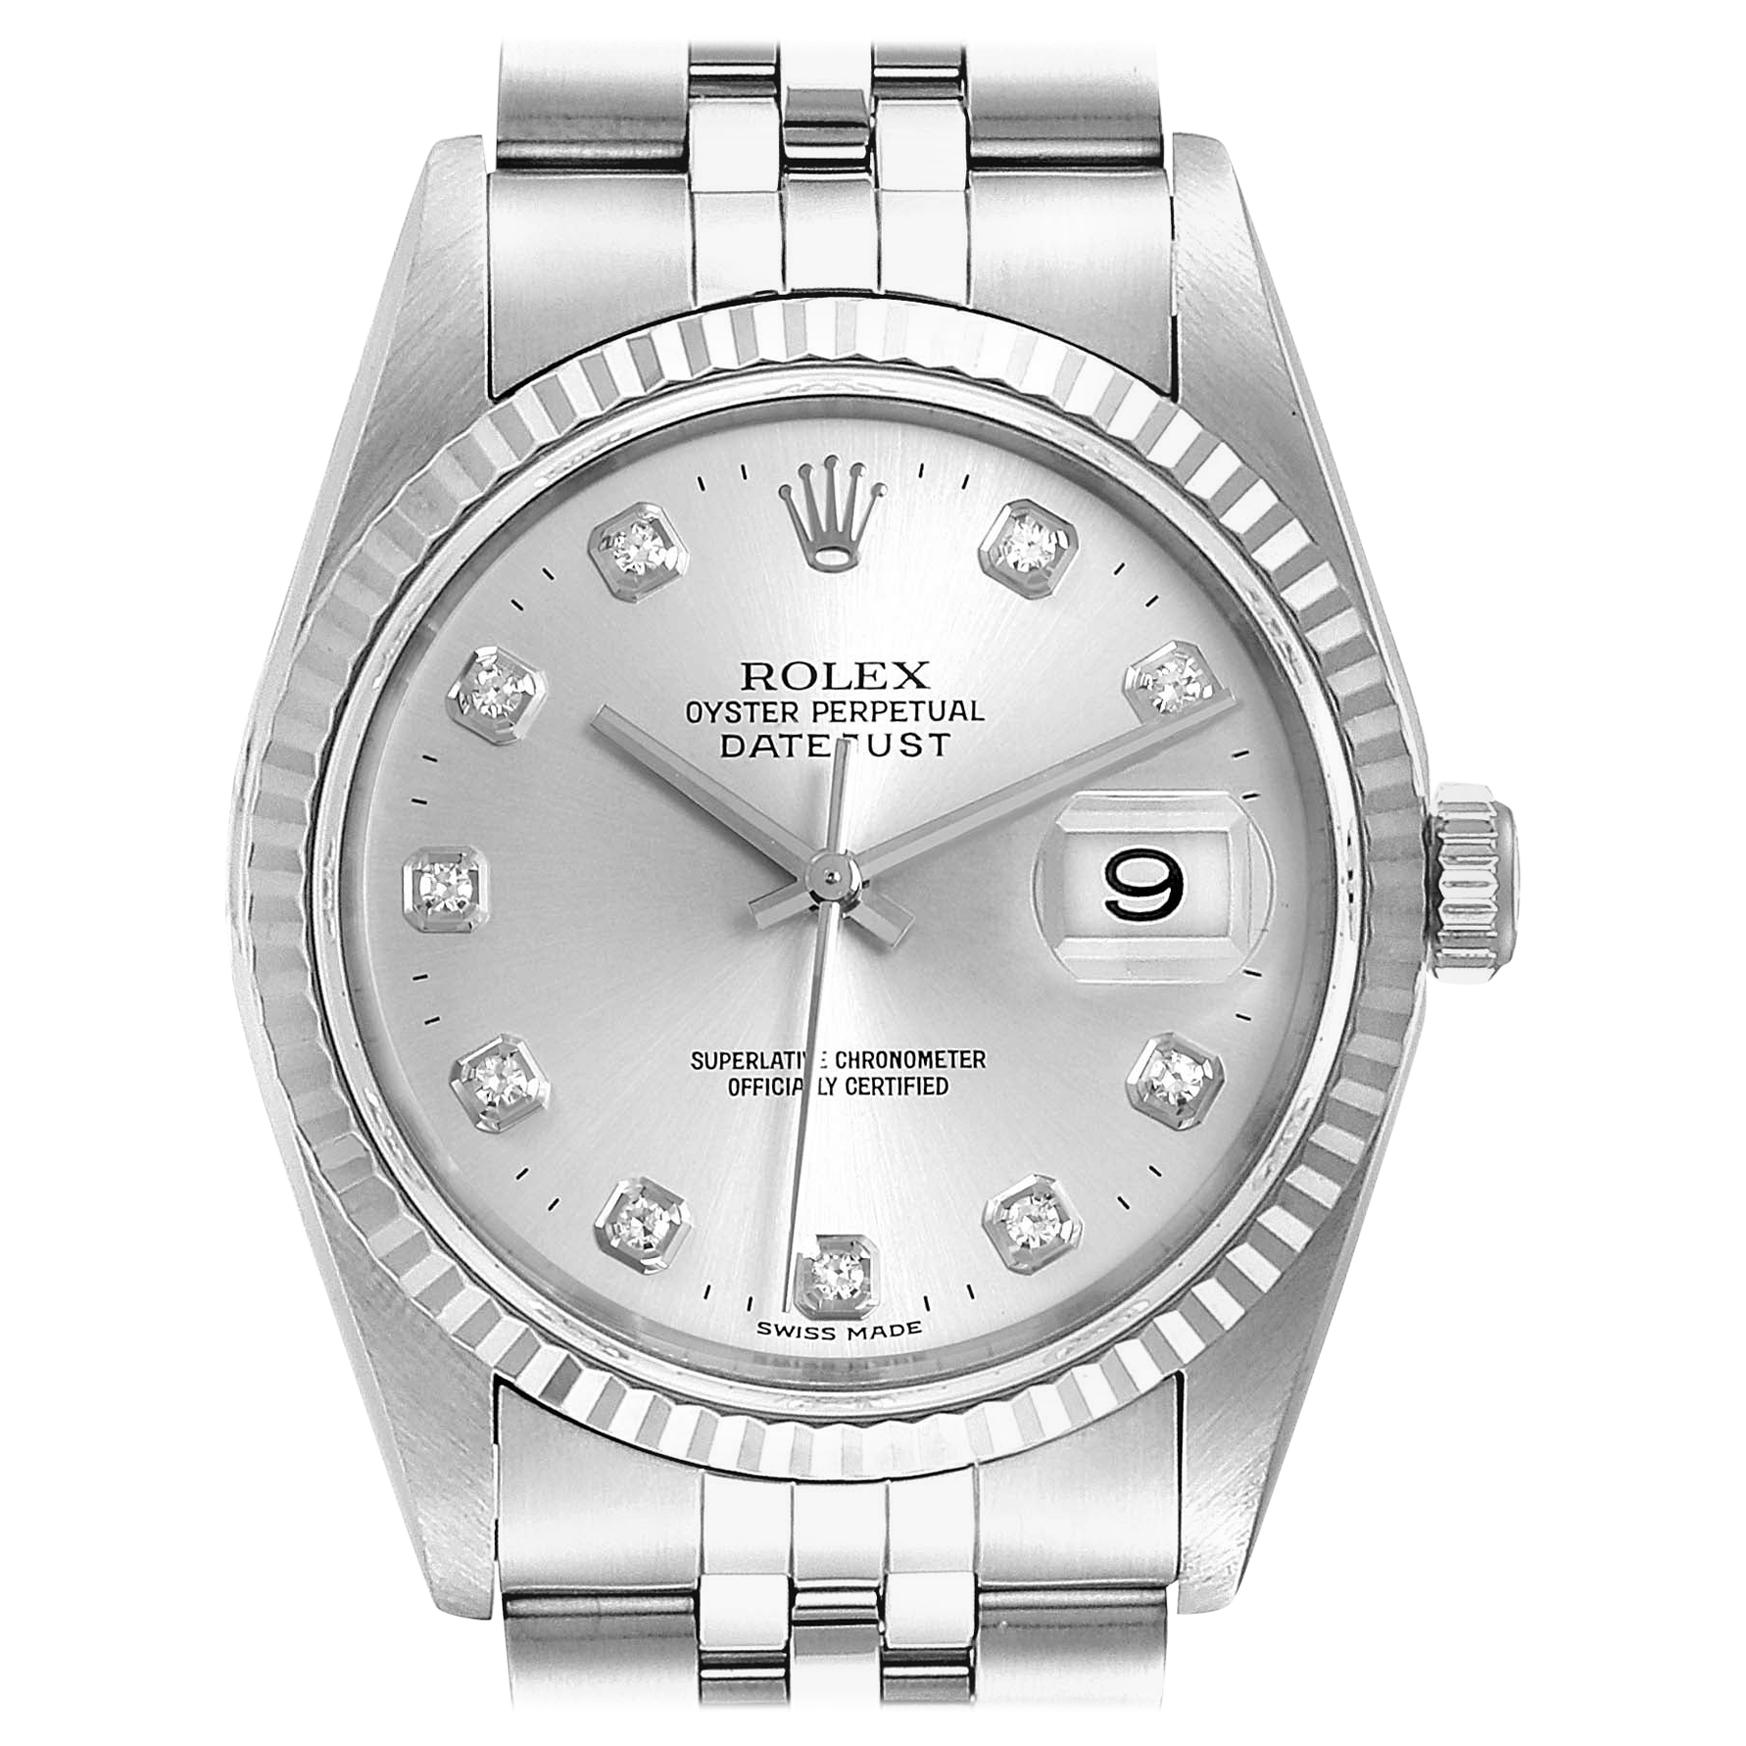 Rolex Datejust Steel White Gold Silver Diamond Dial Men's Watch 16234 For Sale